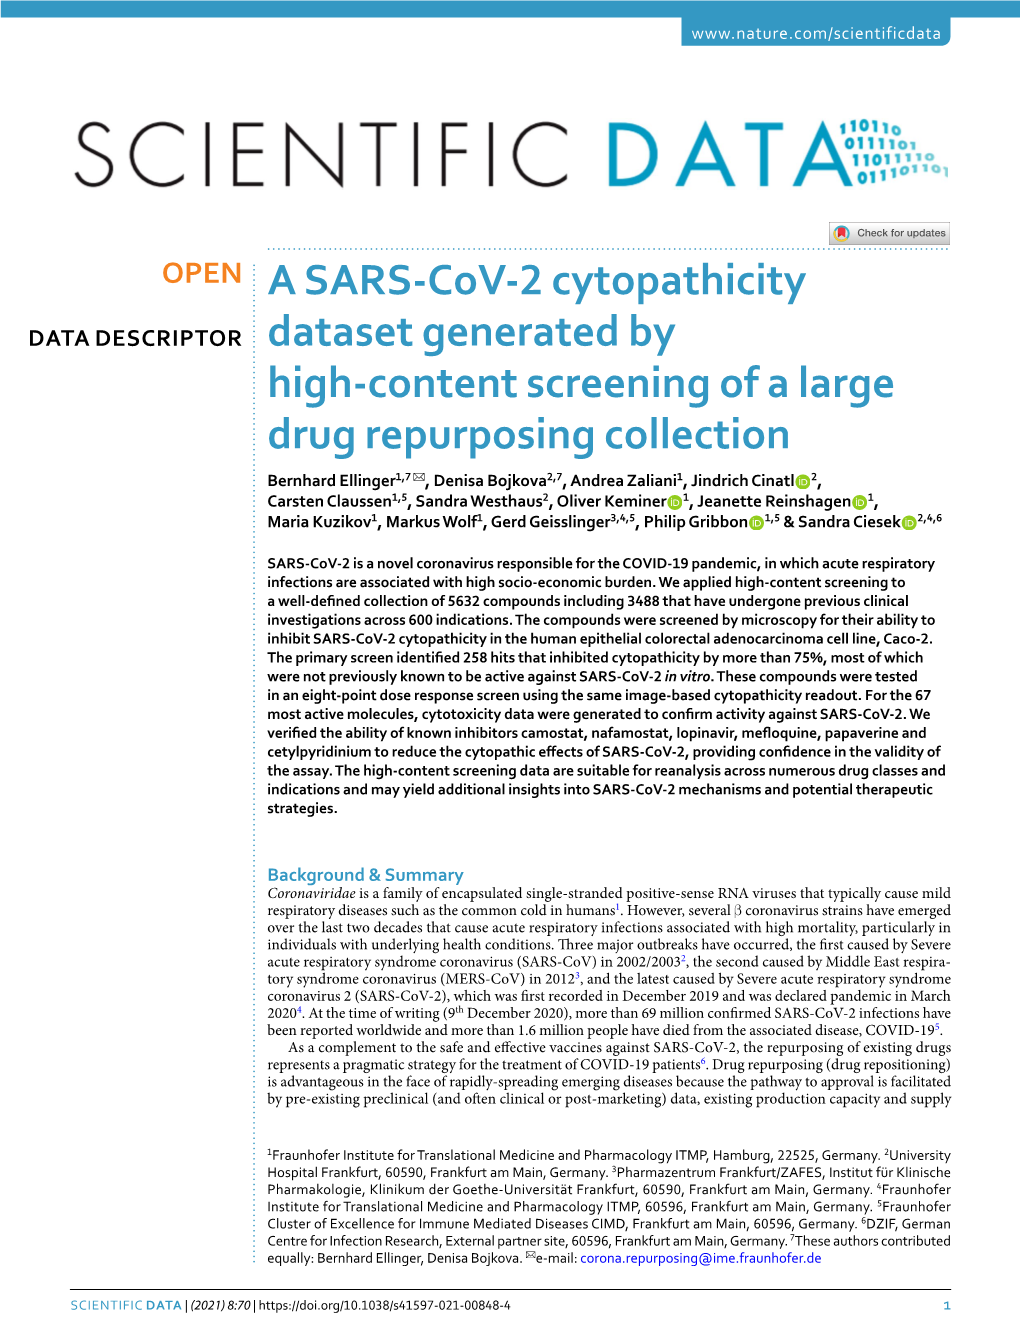 A SARS-Cov-2 Cytopathicity Dataset Generated by High-Content Screening of a Large Drug Repurposing Collection